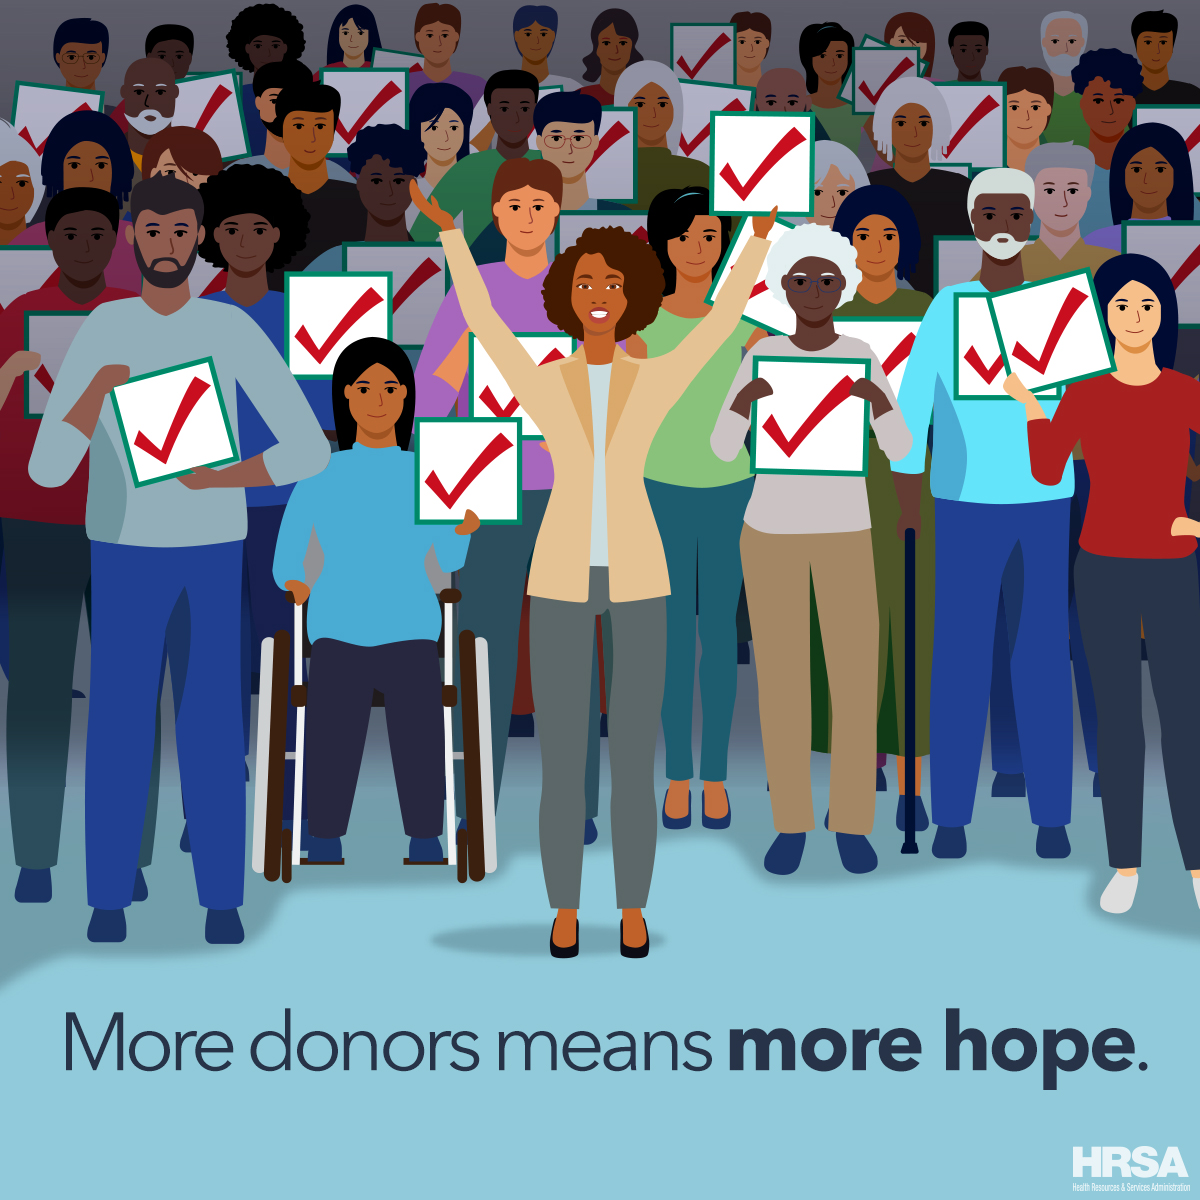 It's the last day of #DonateLifeMonth. Thank you to the incredible donors who make transplantation possible.